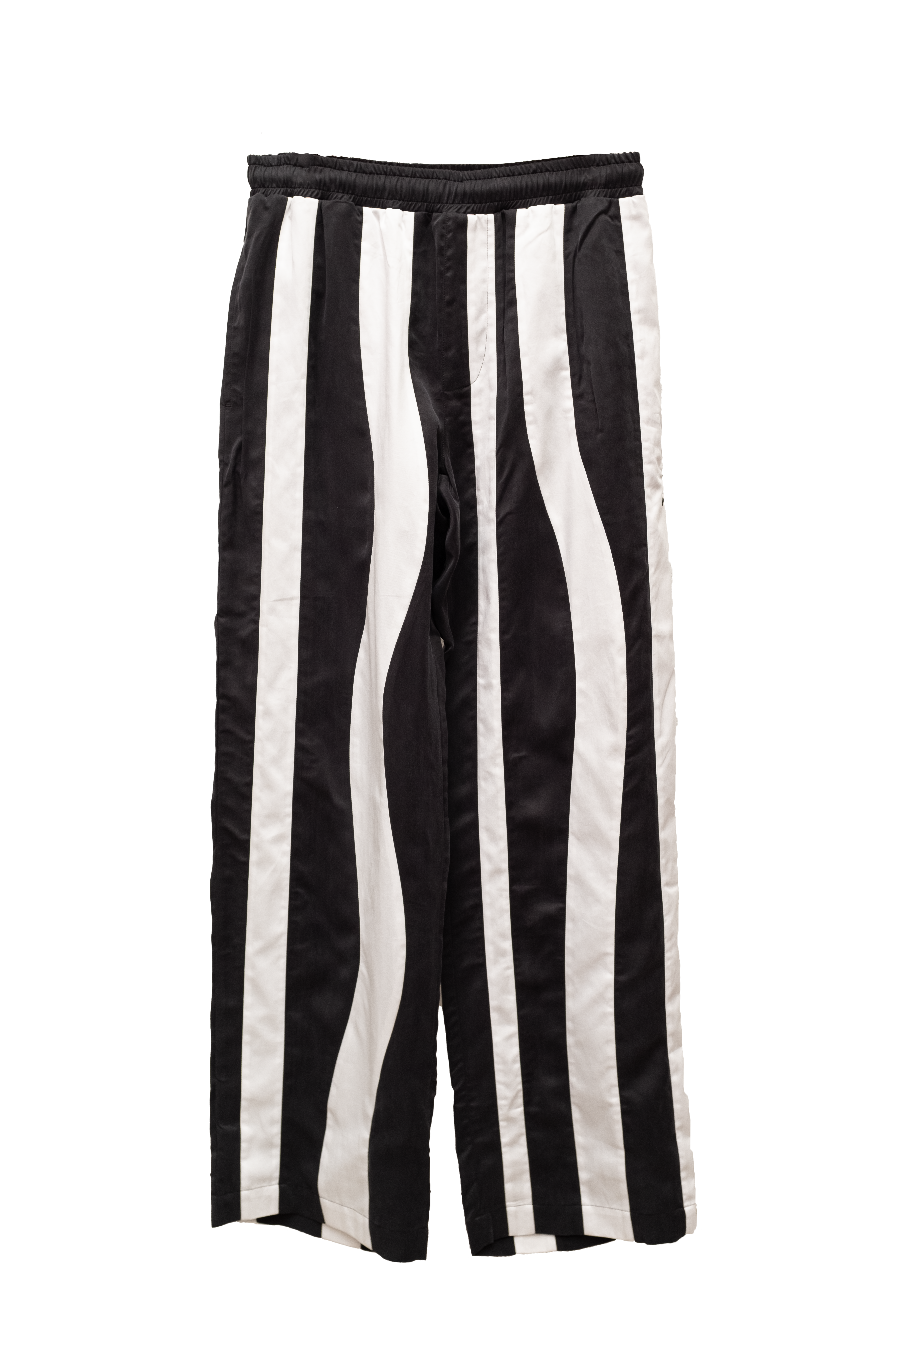 WHITE STRIPES CUPRO RELAX PANT